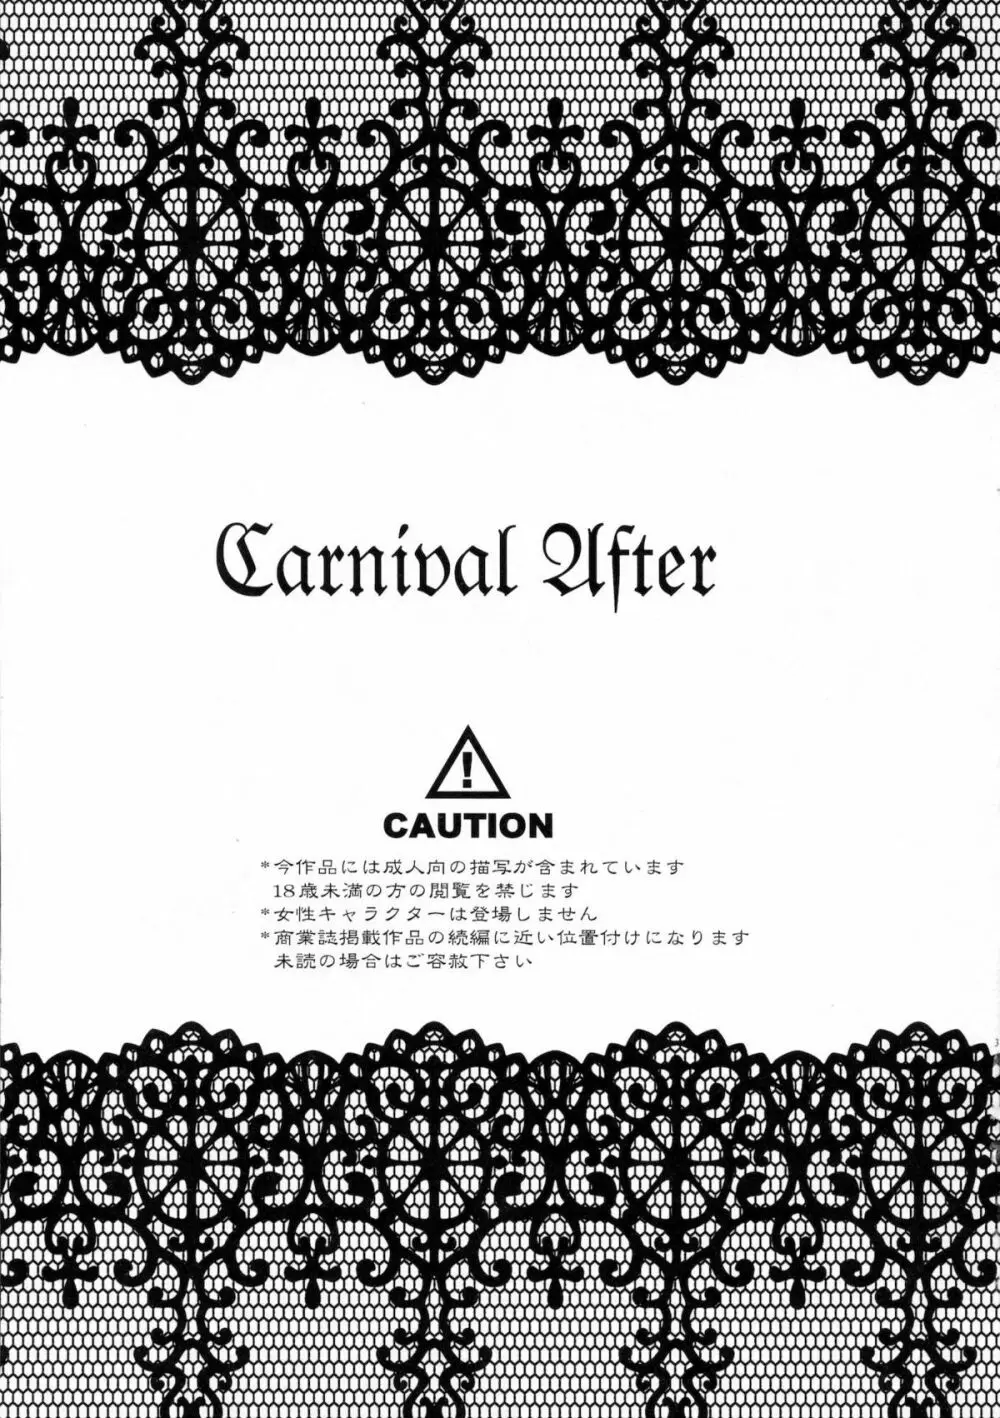 Carnival After 2ページ